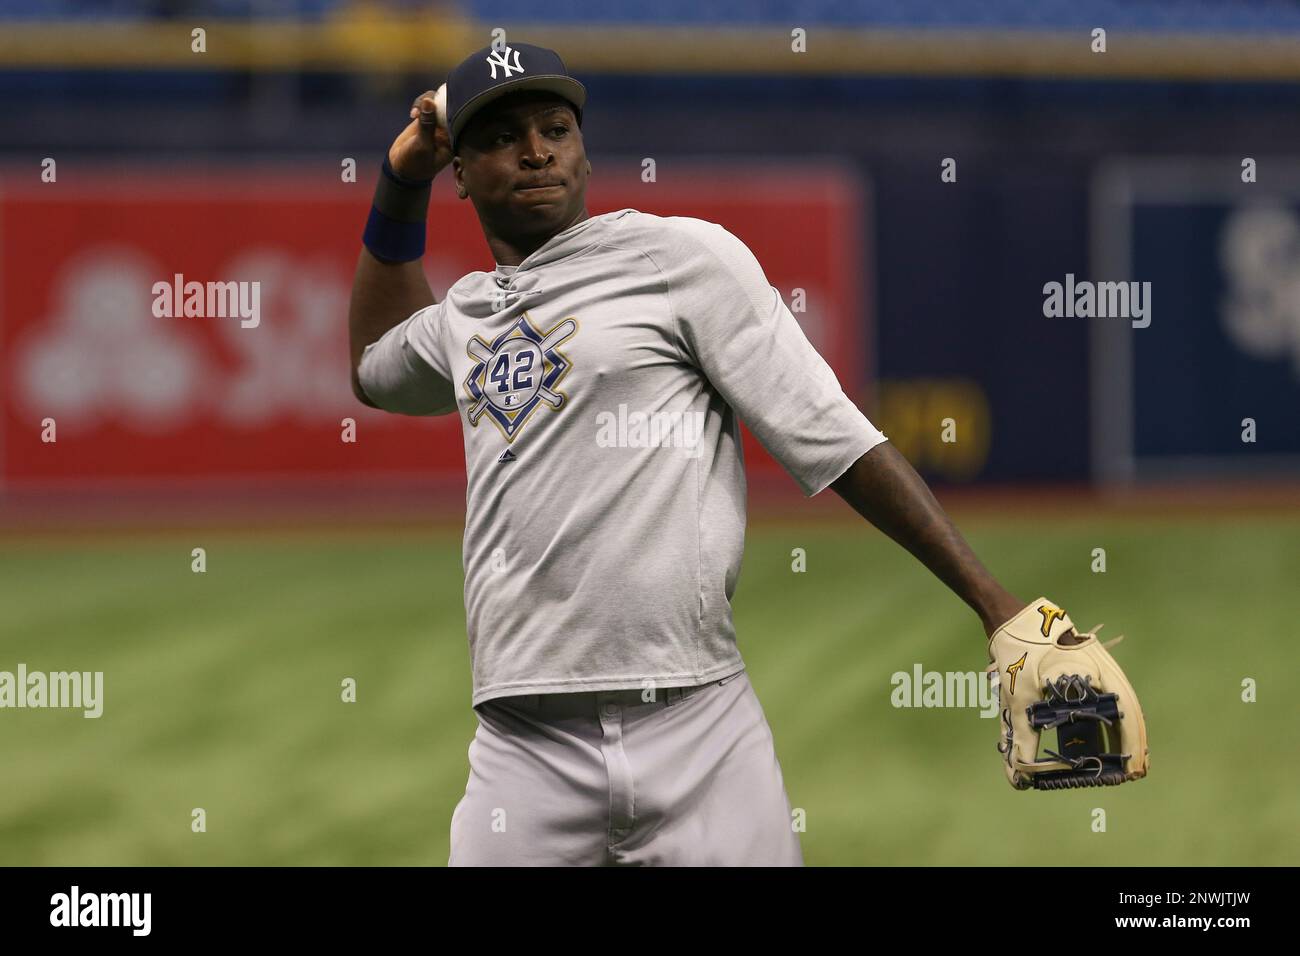 ST. PETERSBURG, FL - SEPTEMBER 26: New York Yankees shortstop Didi Gregorius (18) before the regular season MLB game between the New York Yankees and Tampa Bay Rays on September 26, 2018 at Tropicana Field in St. Petersburg, FL. (Photo by Mark LoMoglio/Icon Sportswire) (Icon Sportswire via AP Images) Foto de stock